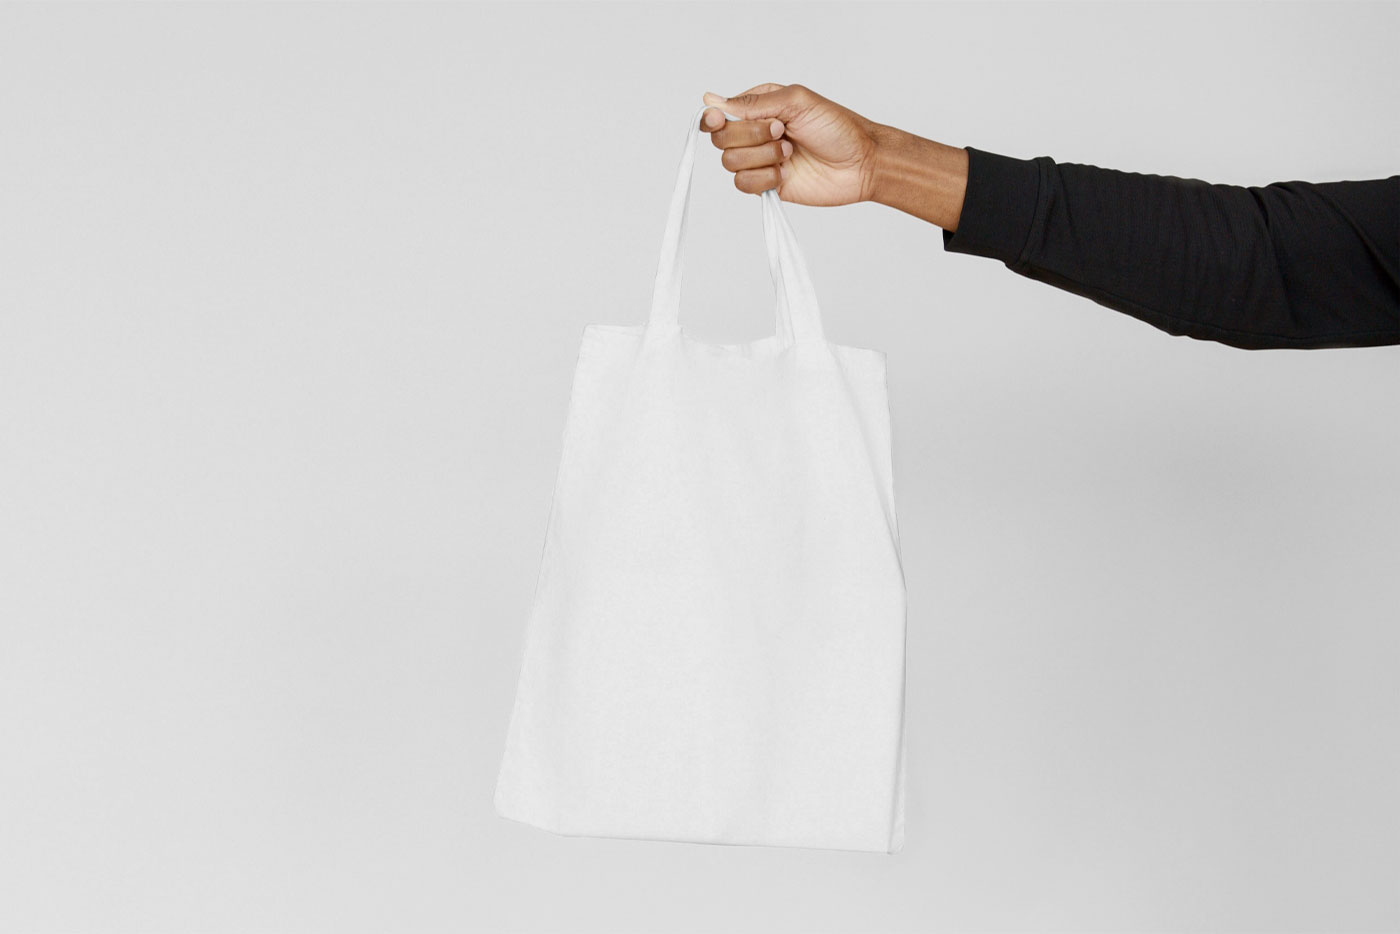 Handholding Canvas Bag Mockup from Front View FREE PSD